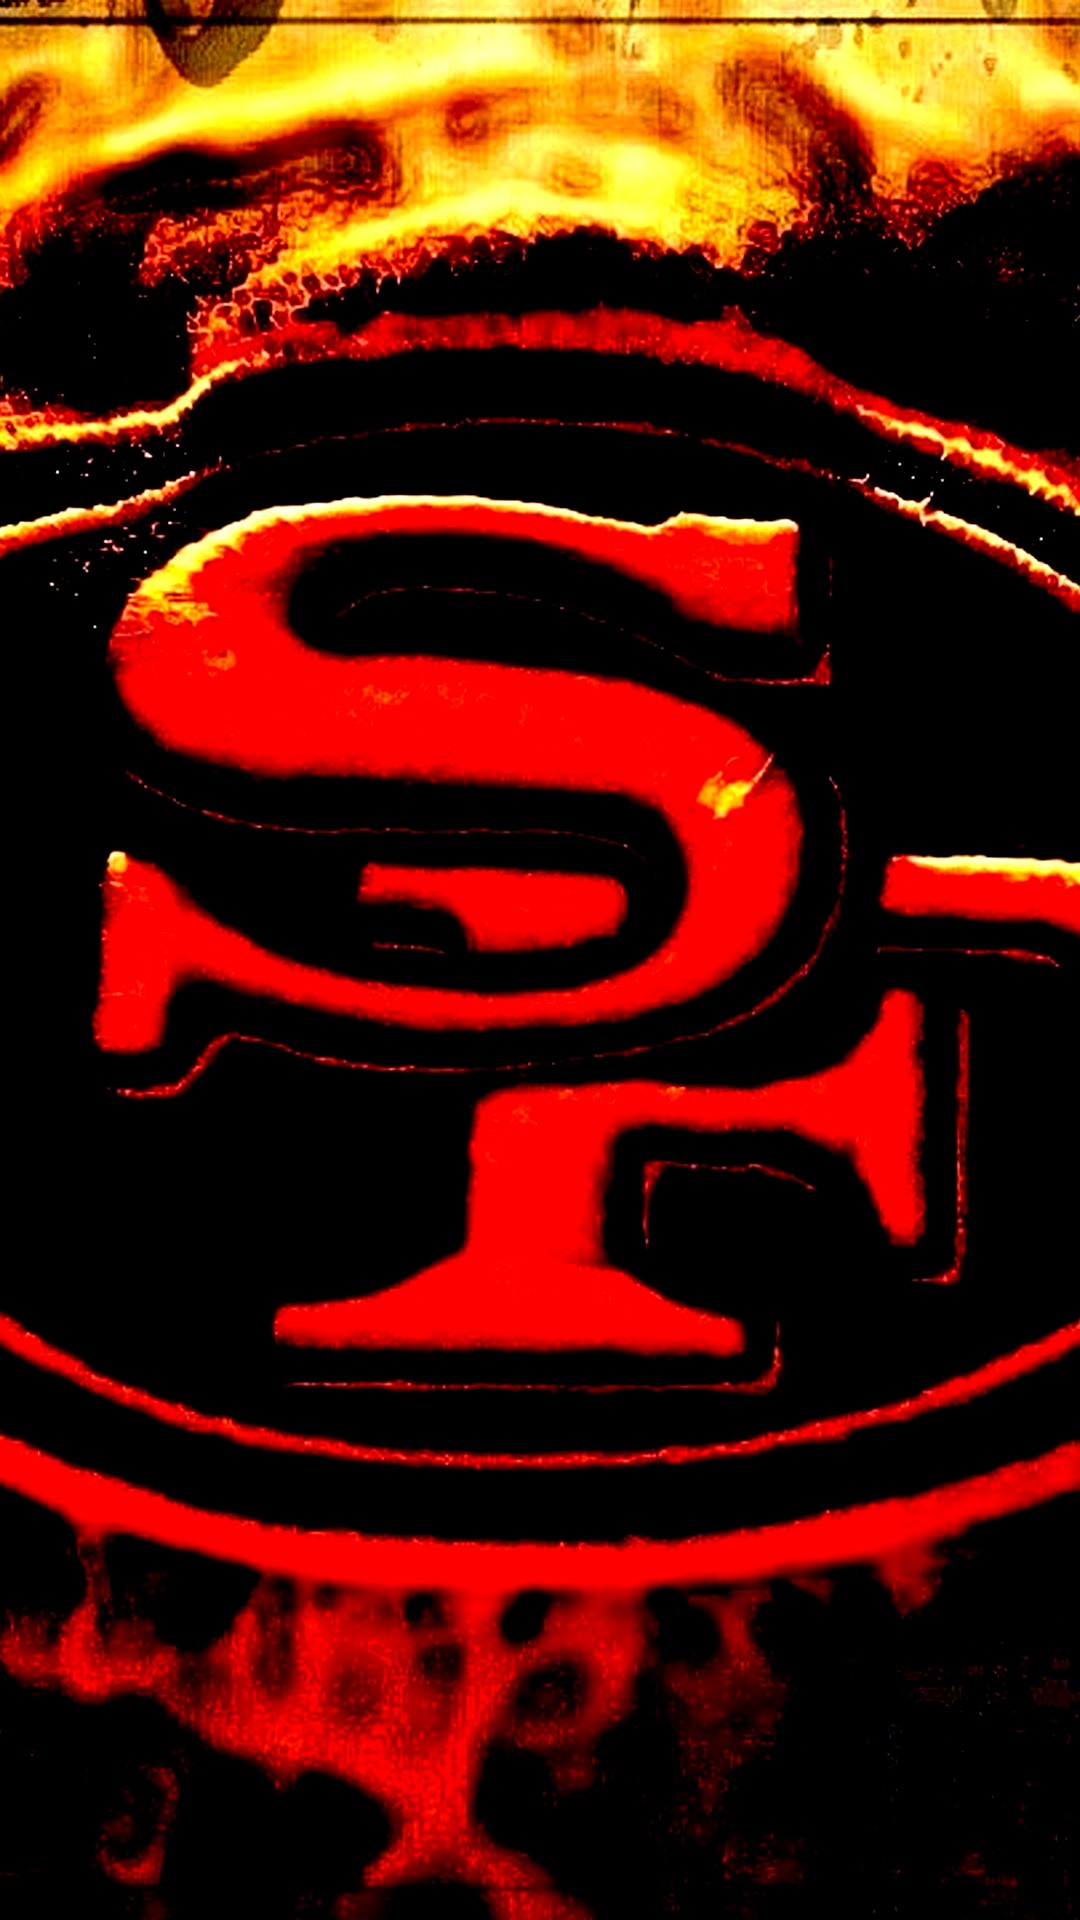 49ers iPhone Wallpaper in HD with high-resolution 1080x1920 pixel. Download and set as wallpaper for Desktop Computer, Apple iPhone X, XS Max, XR, 8, 7, 6, SE, iPad, Android